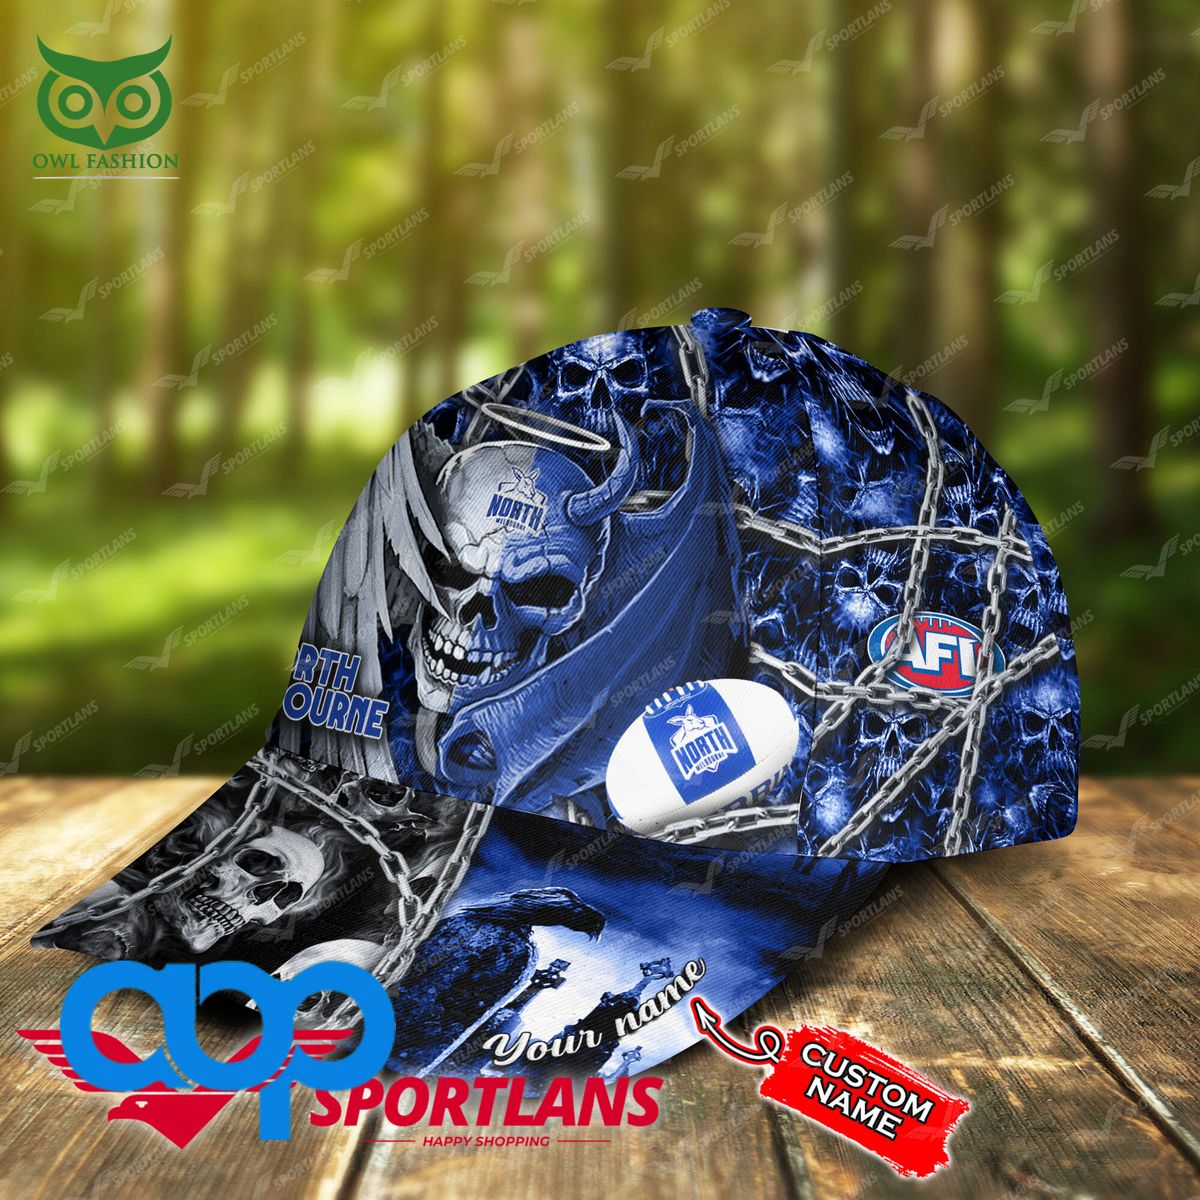 north melbourne football club afl personalized 3d printed cap 2 sBQfs